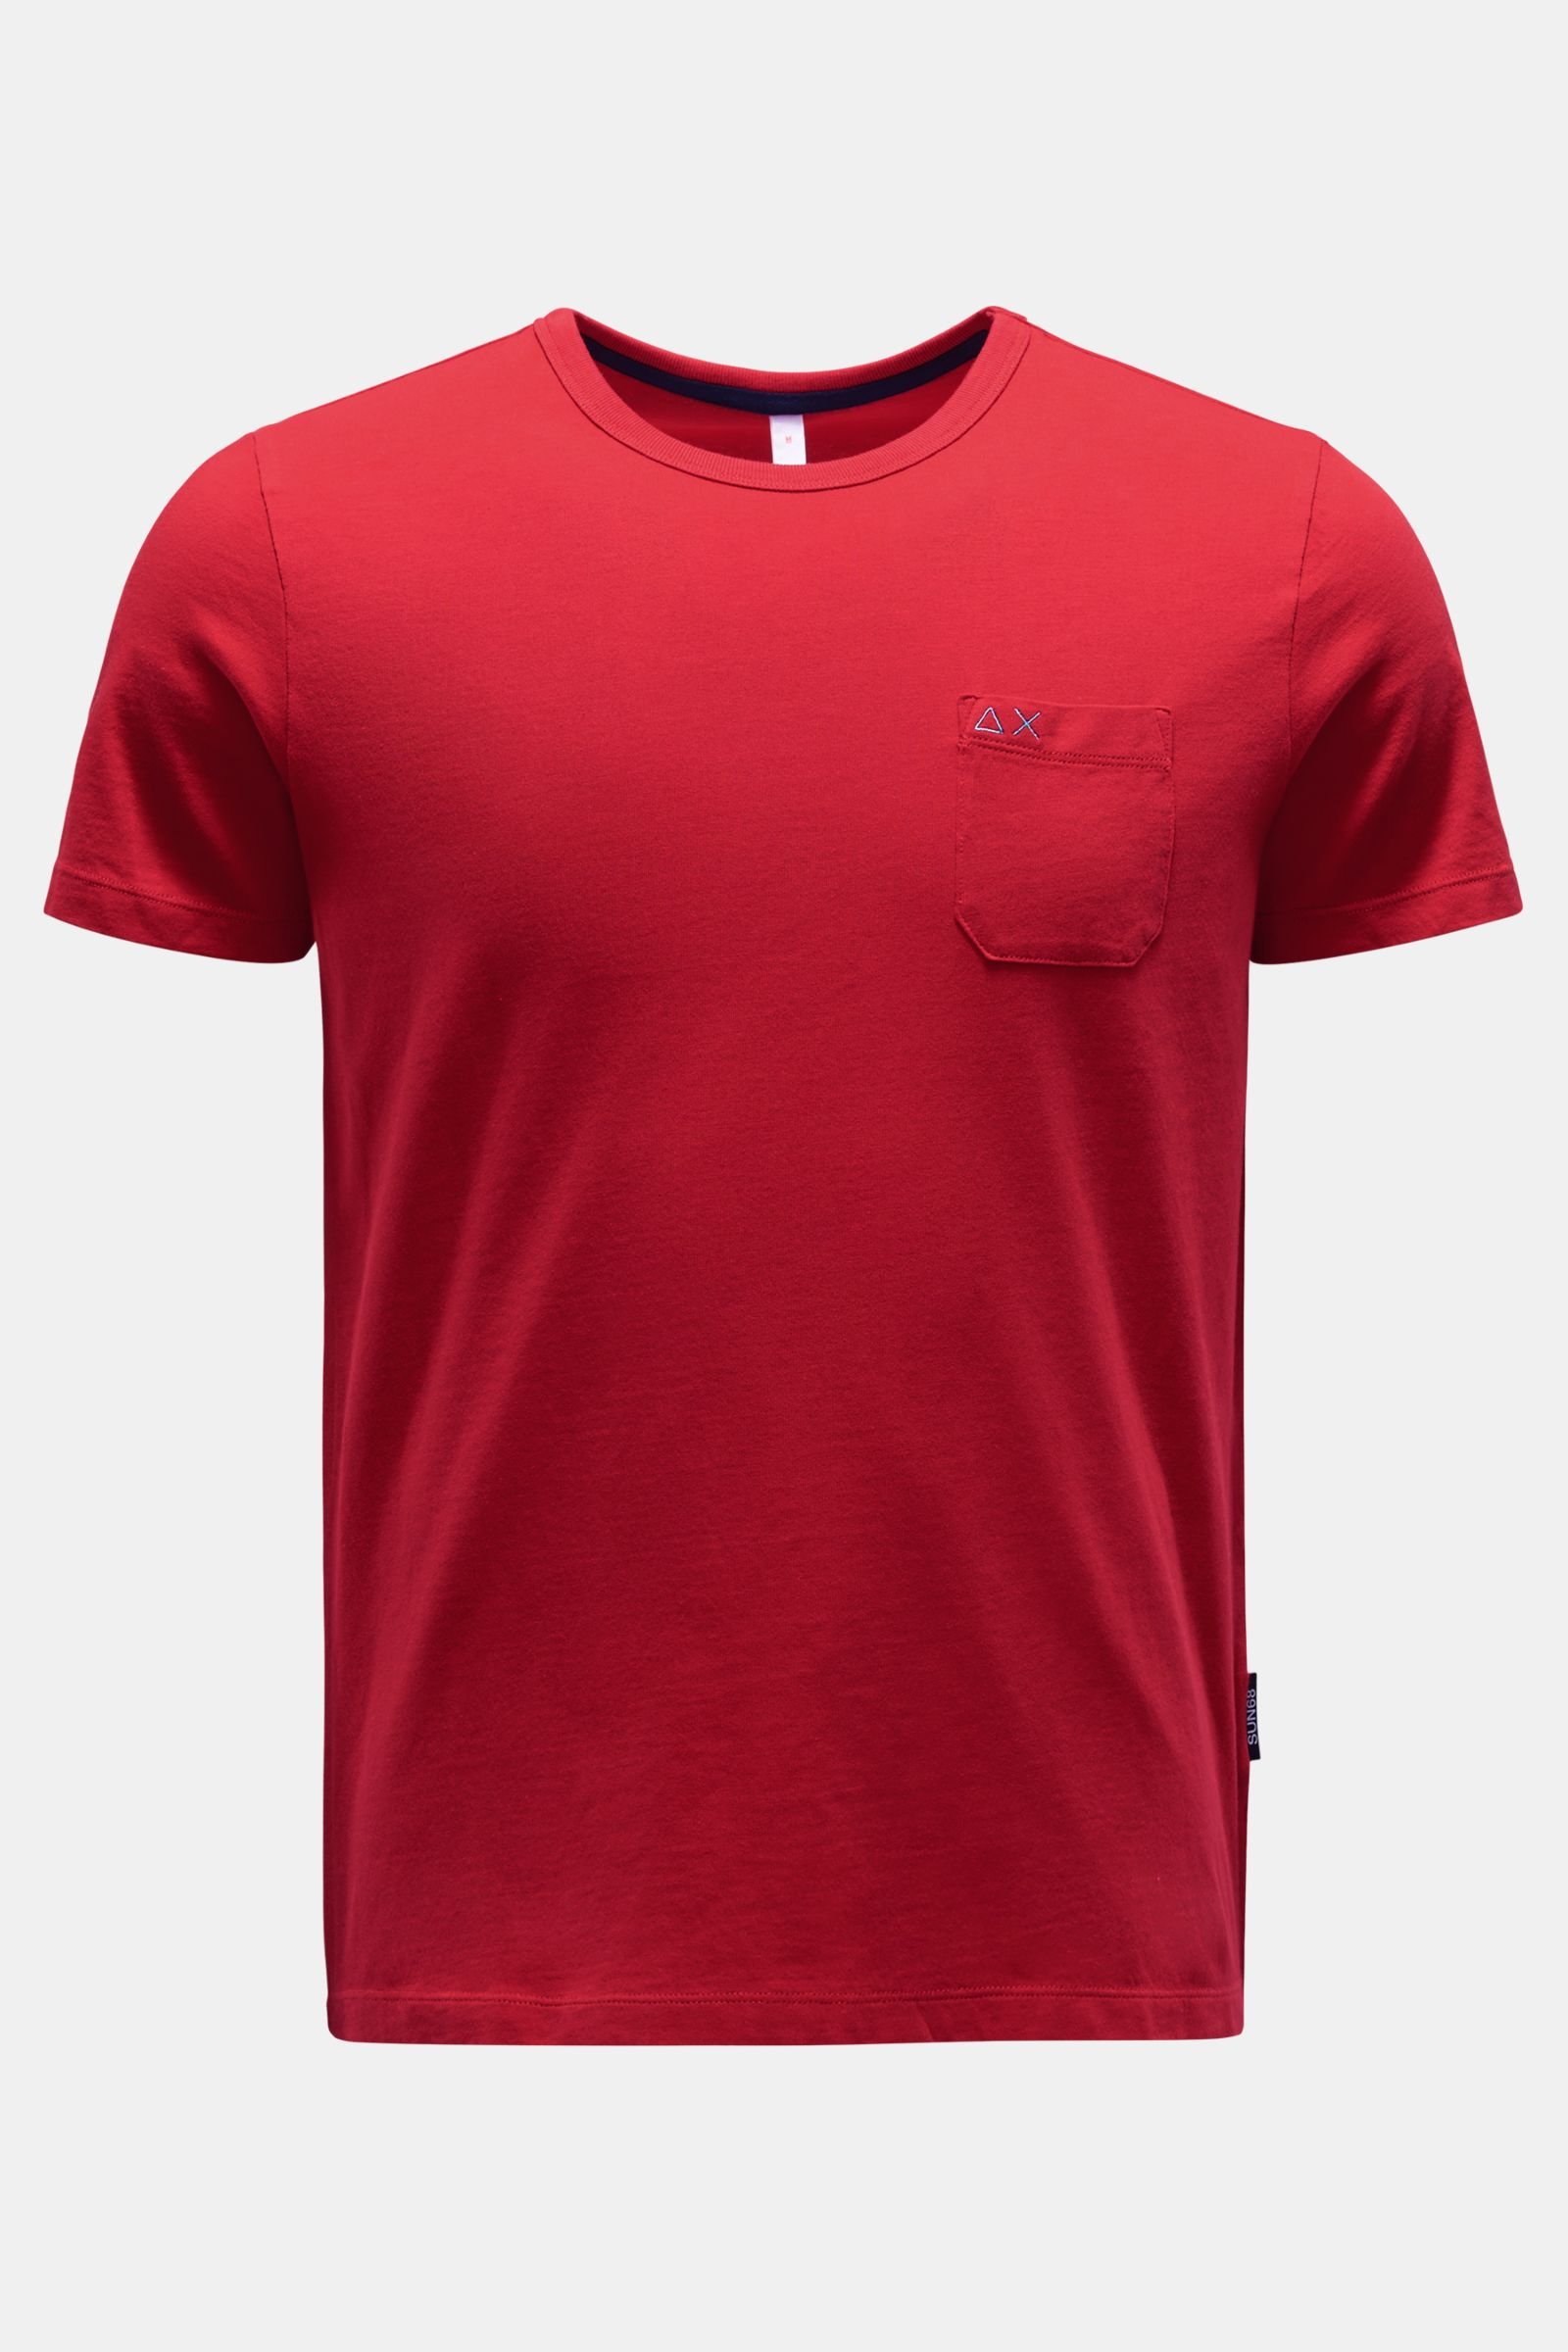 Crew neck T-shirt red